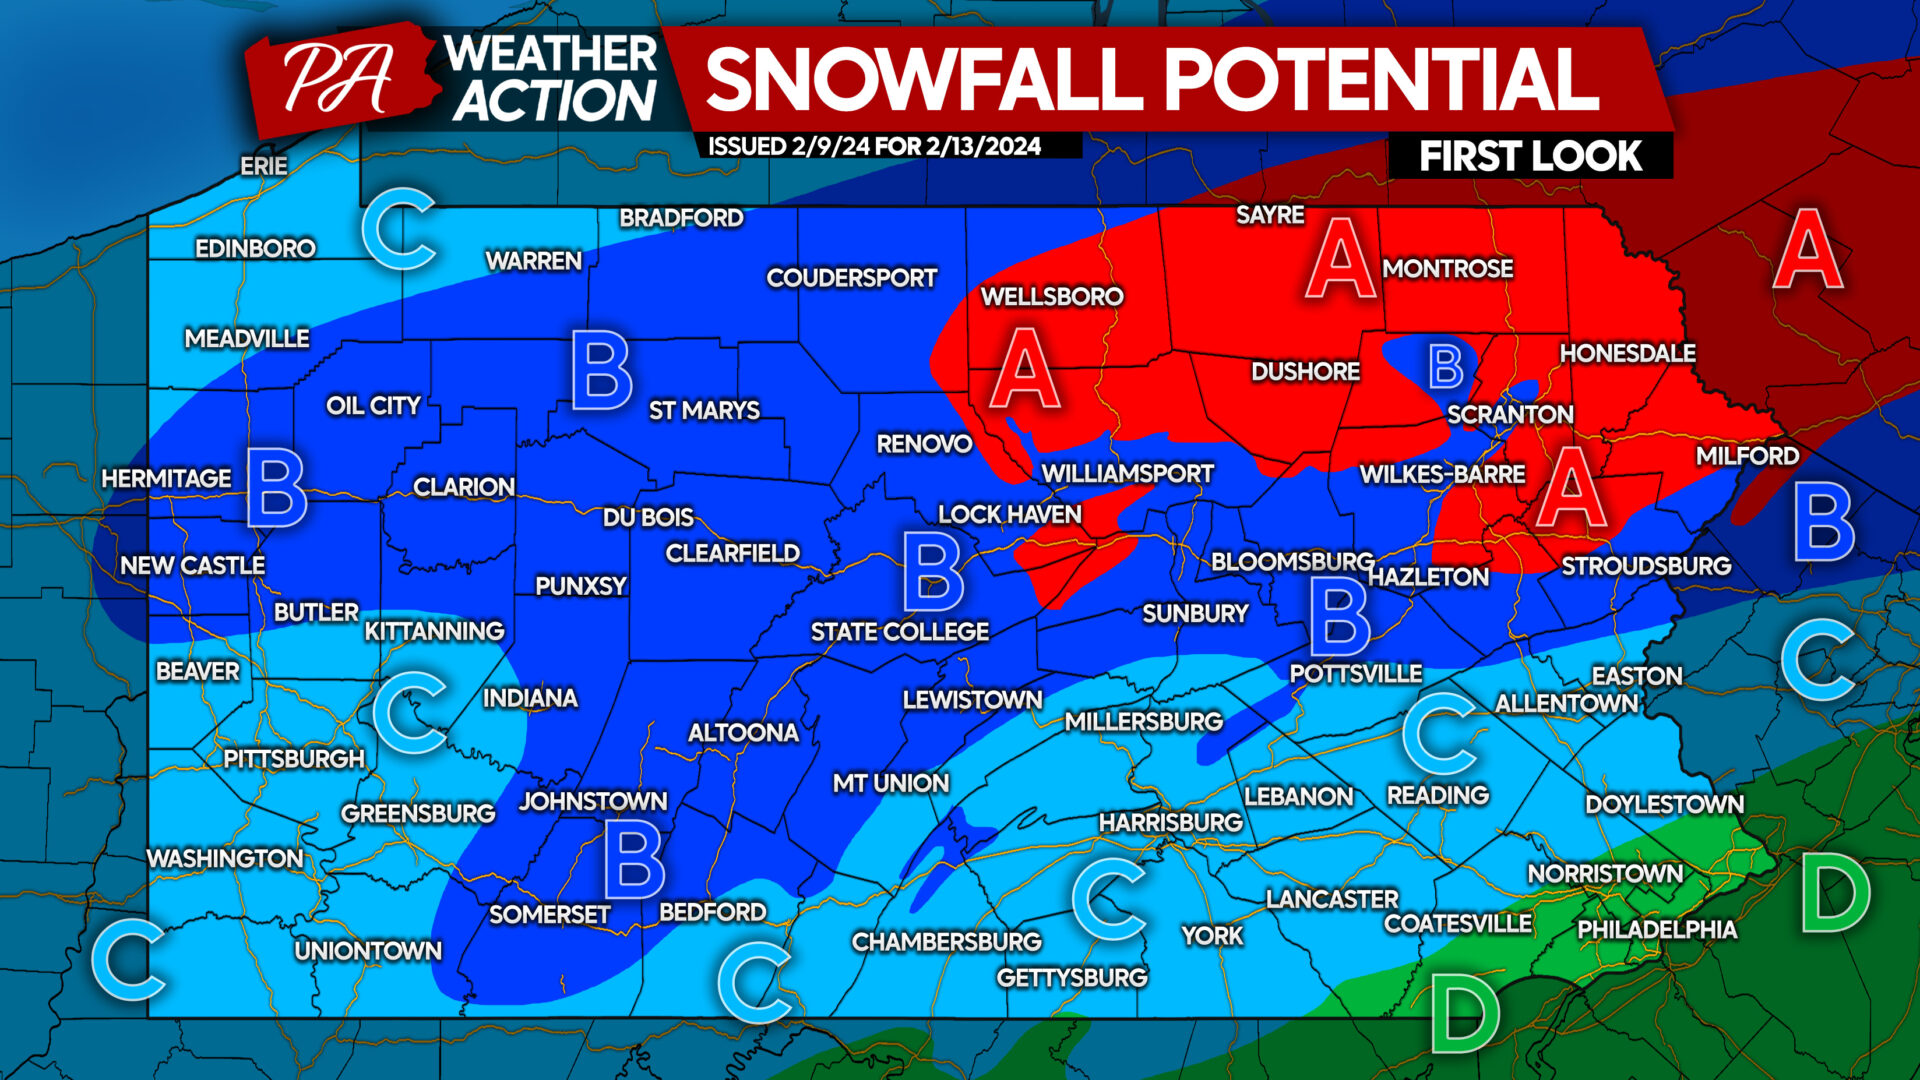 First Look At Significant Snowfall Potential for Tuesday 2/13 In Much of Pennsylvania